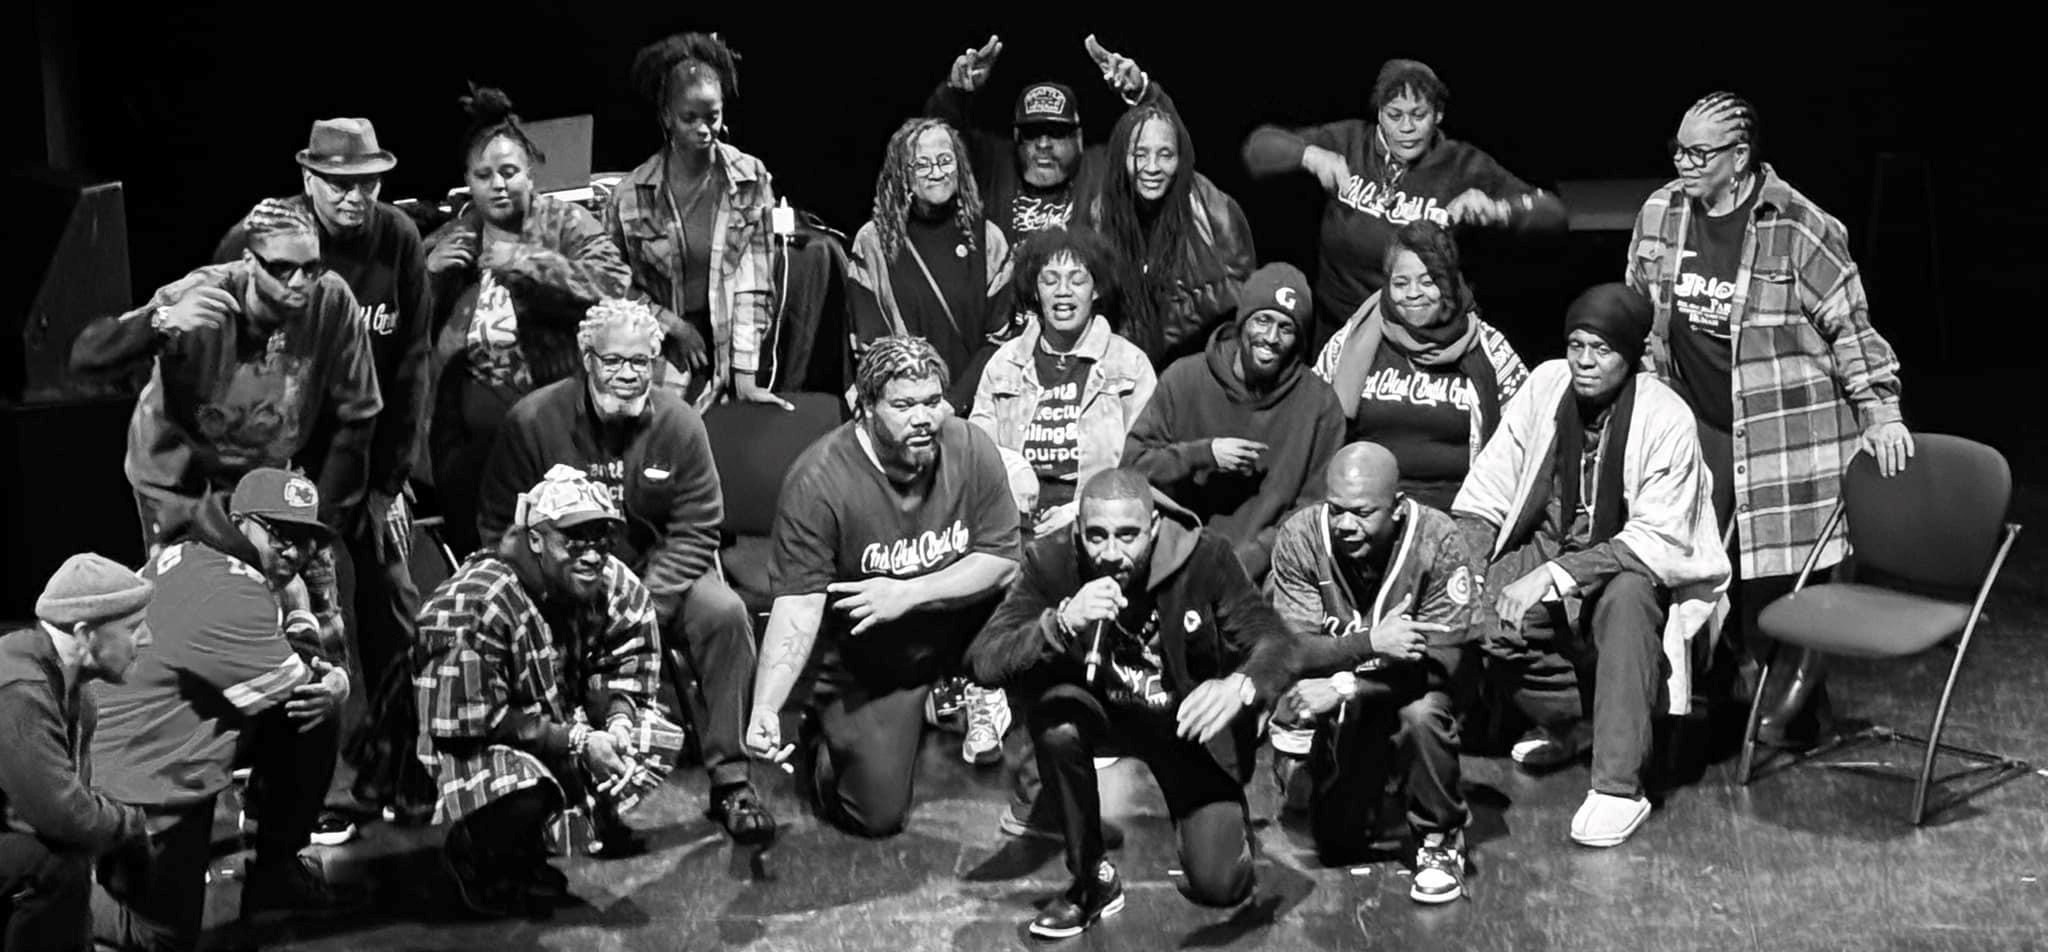 A group of performers gathered together for a black and white photo.